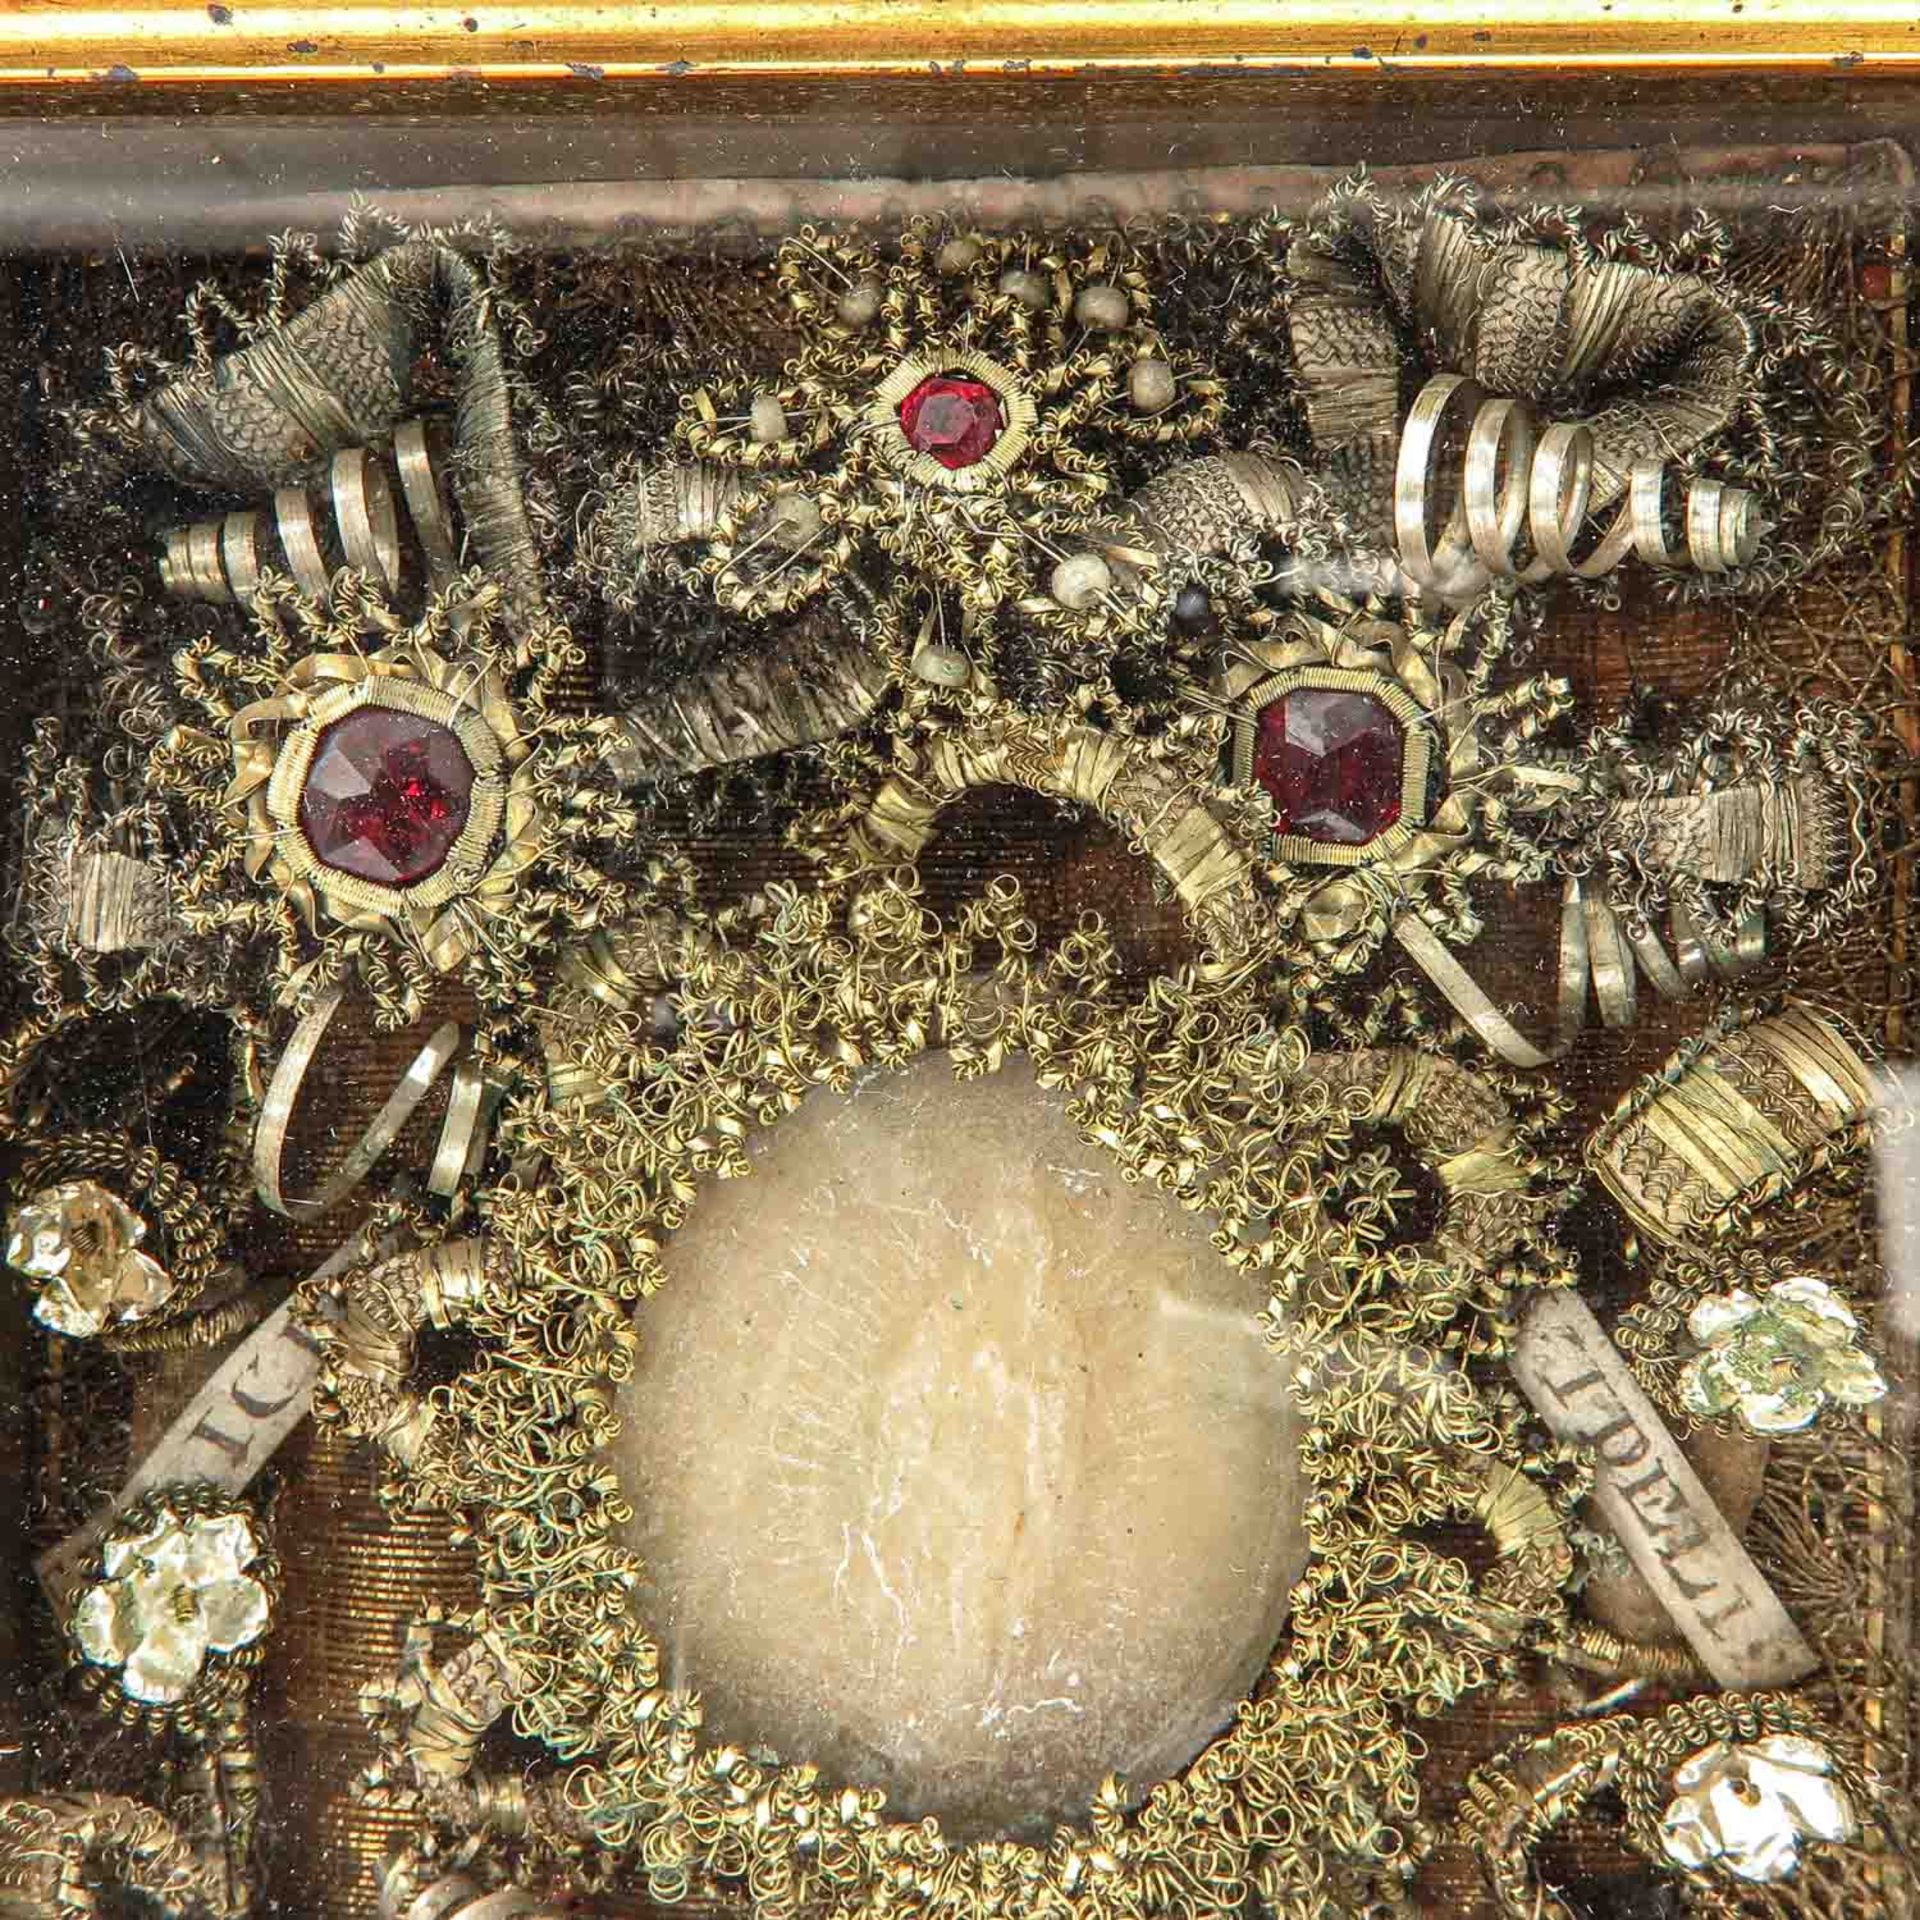 A Relic Frame Holding 2 Relics - Image 3 of 5